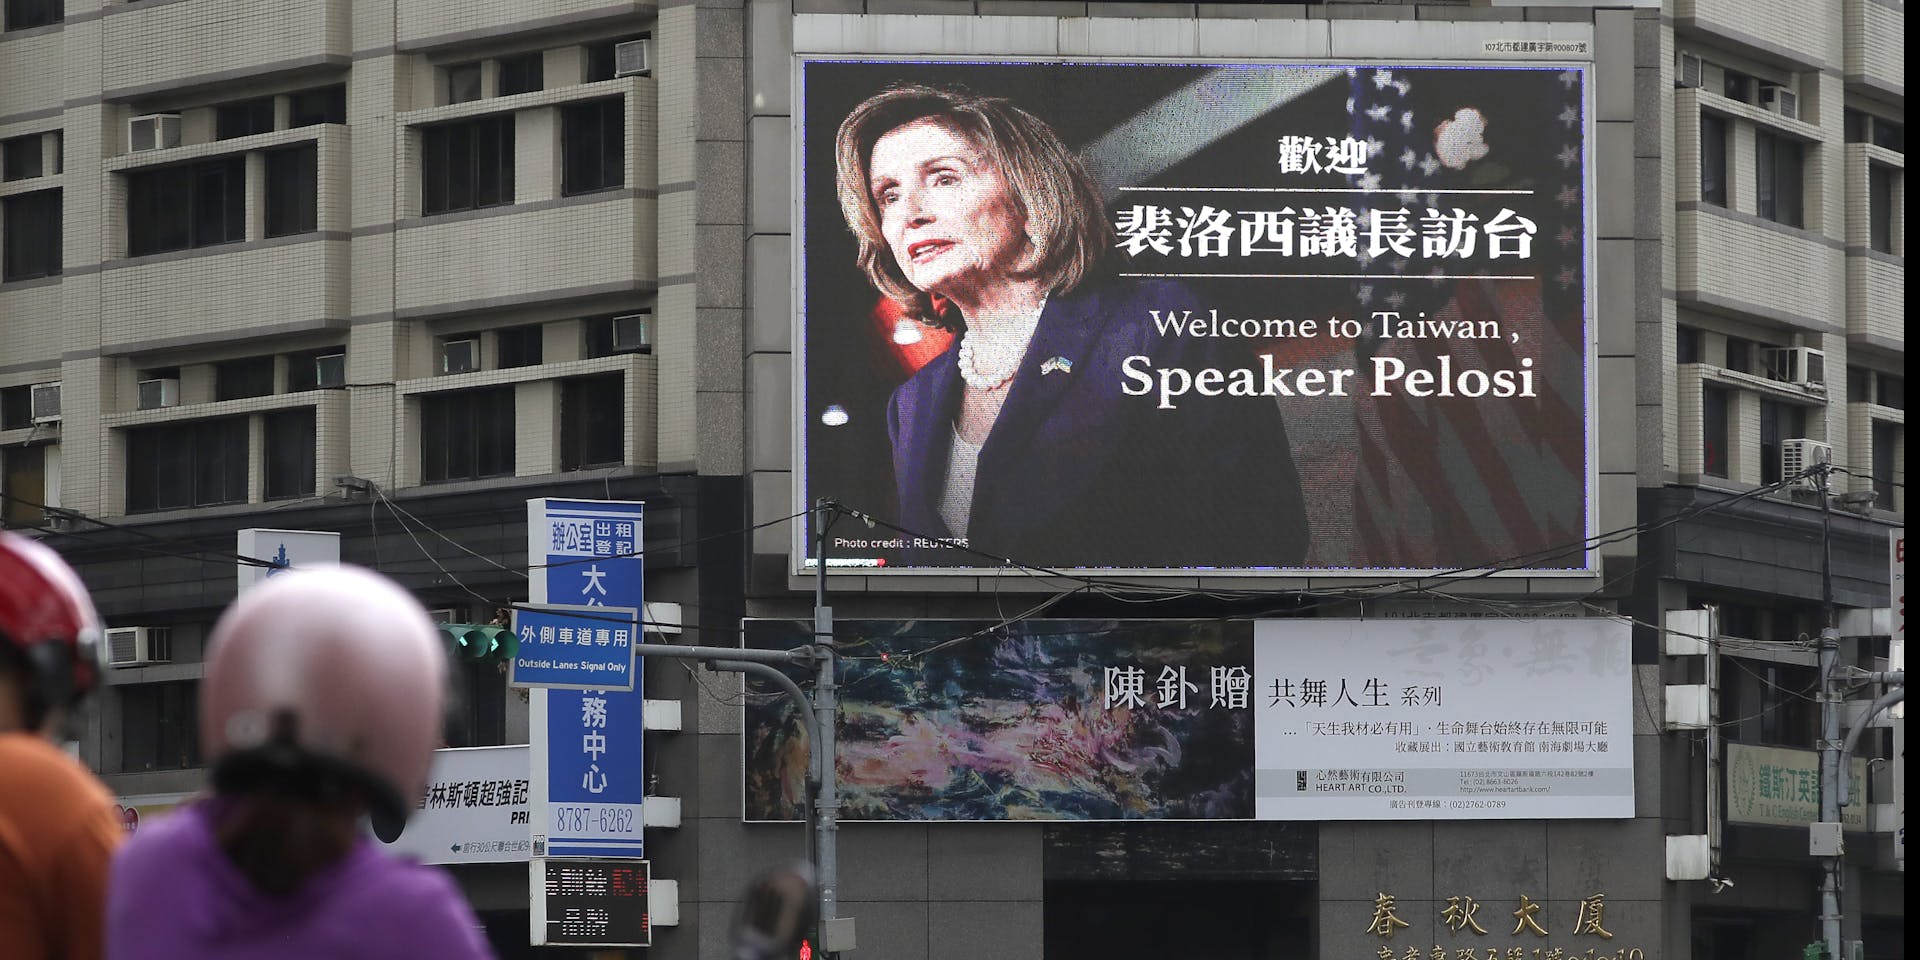 Nancy Pelosi's visit to Taiwan causes an ongoing Chinese tantrum in the Taiwan Strait